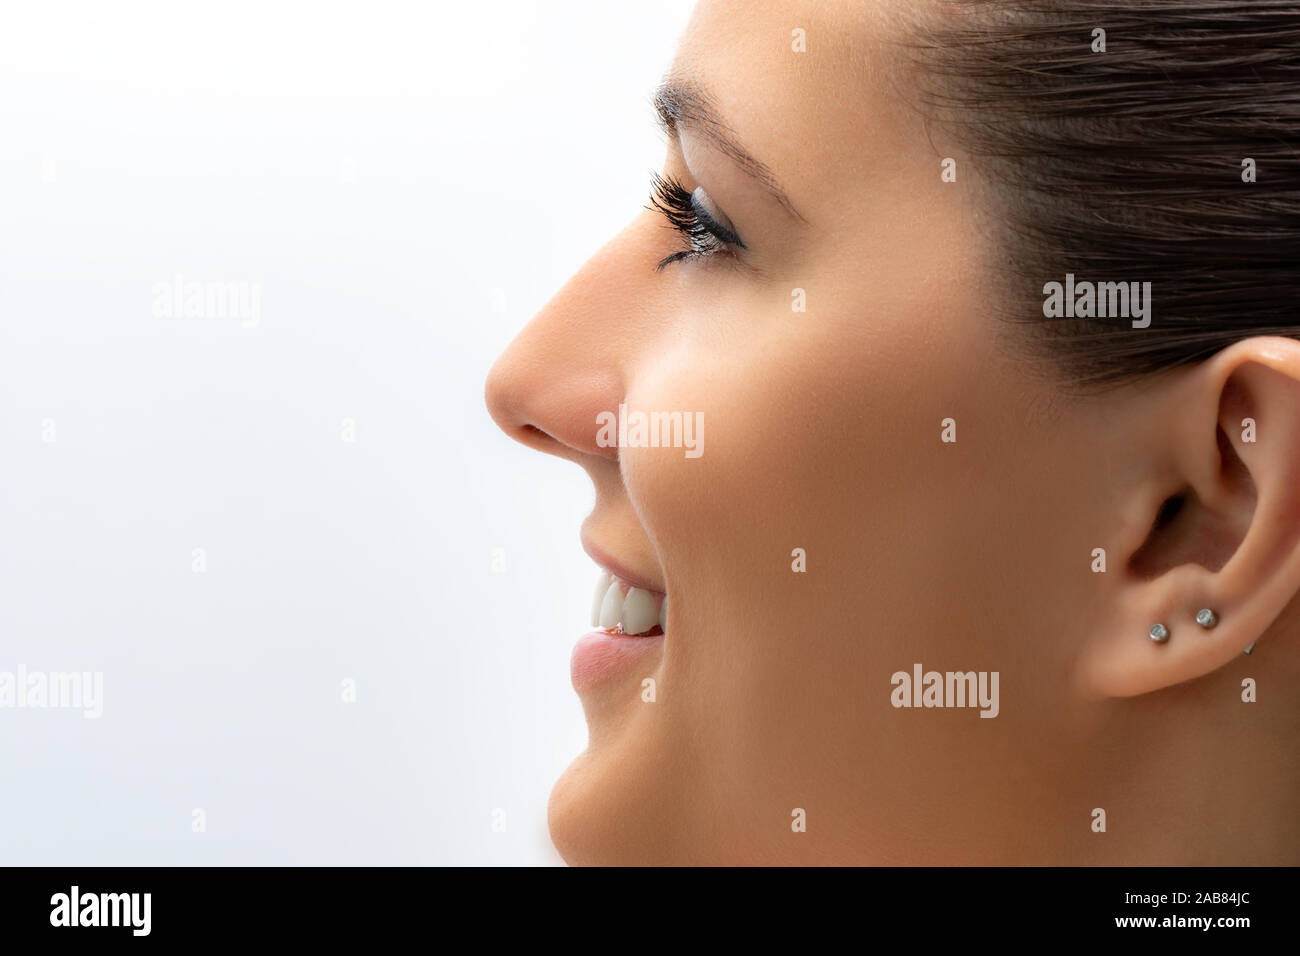 Macro close up portrait of beautiful young woman smiling. Girl looking aside isolated on white background. Stock Photo